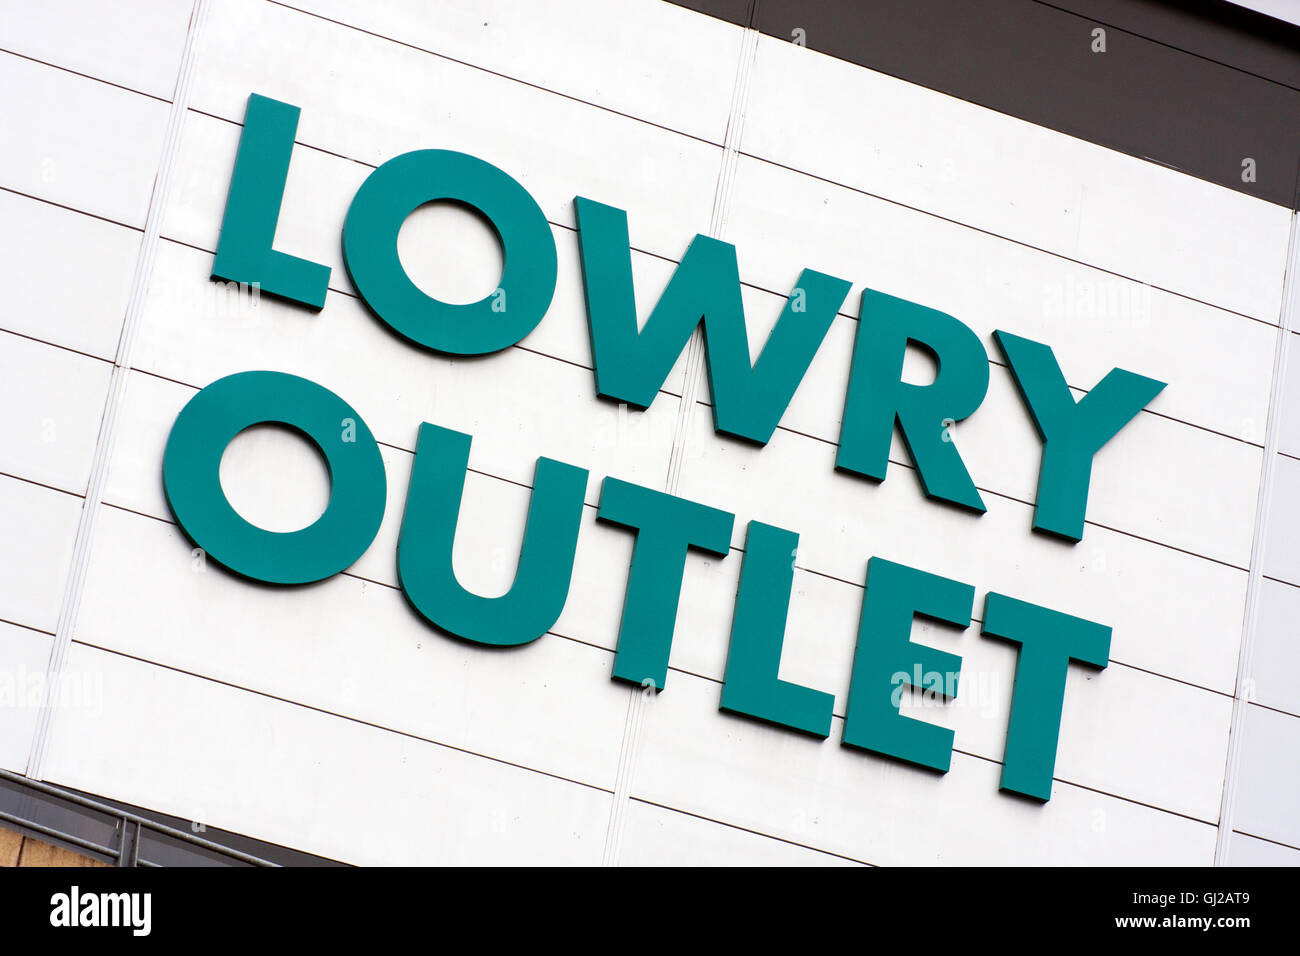 Lowry Outlet Sign Stock Photo